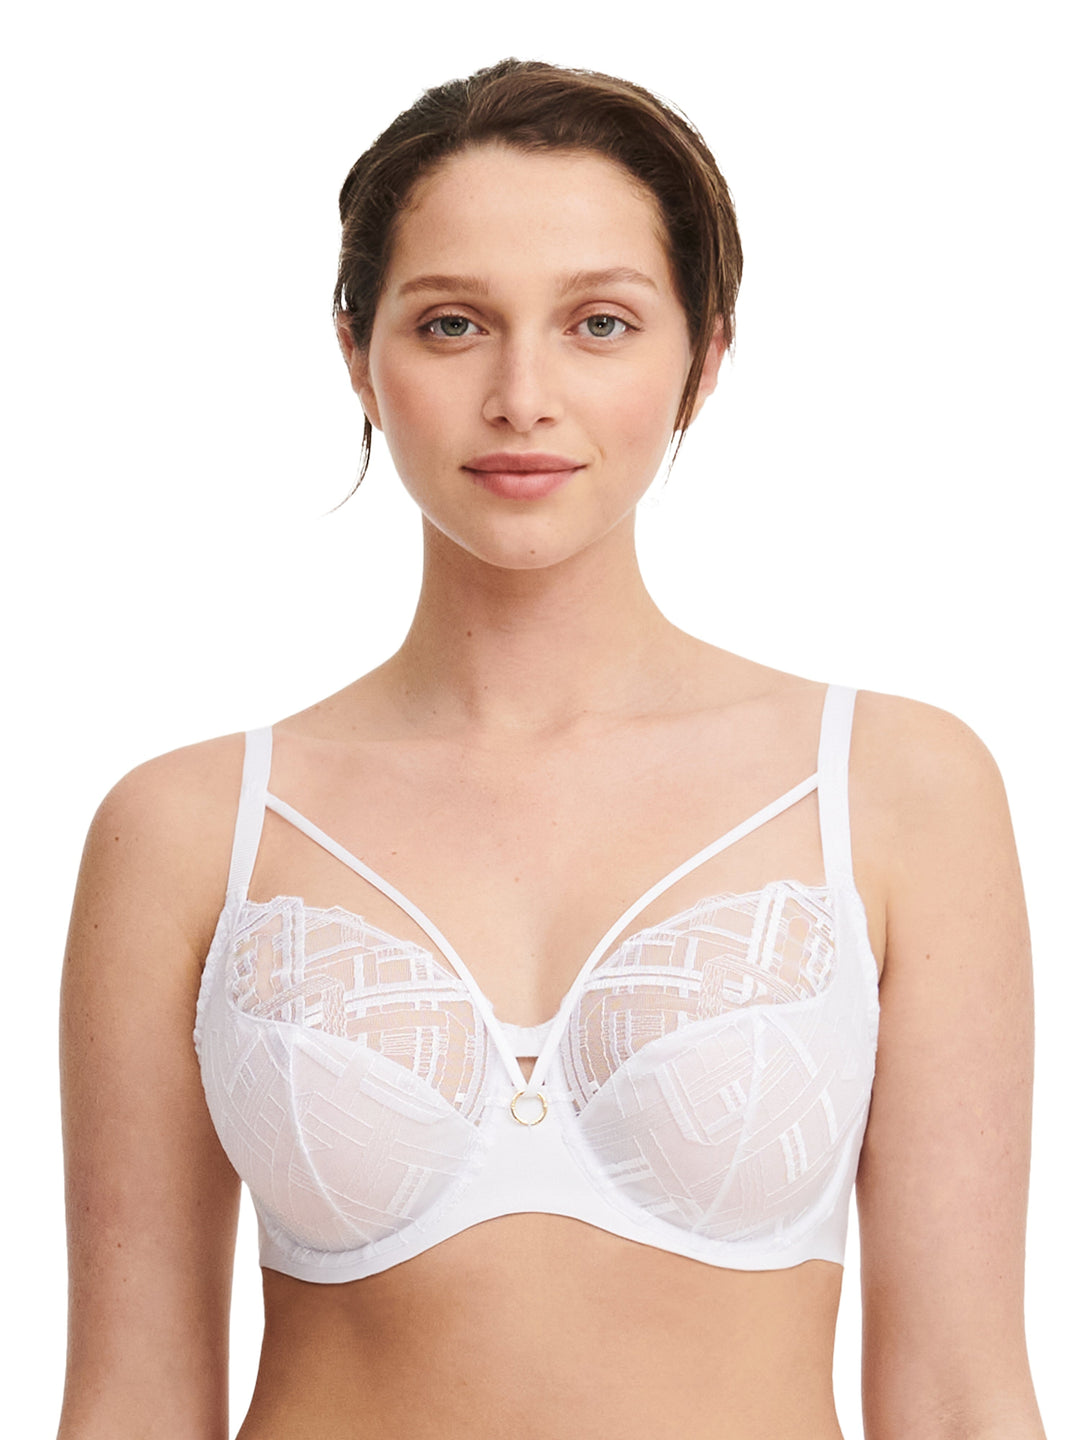 Chantelle - Graphic Support Very Covering Underwired White Full Cup Bra Chantelle 